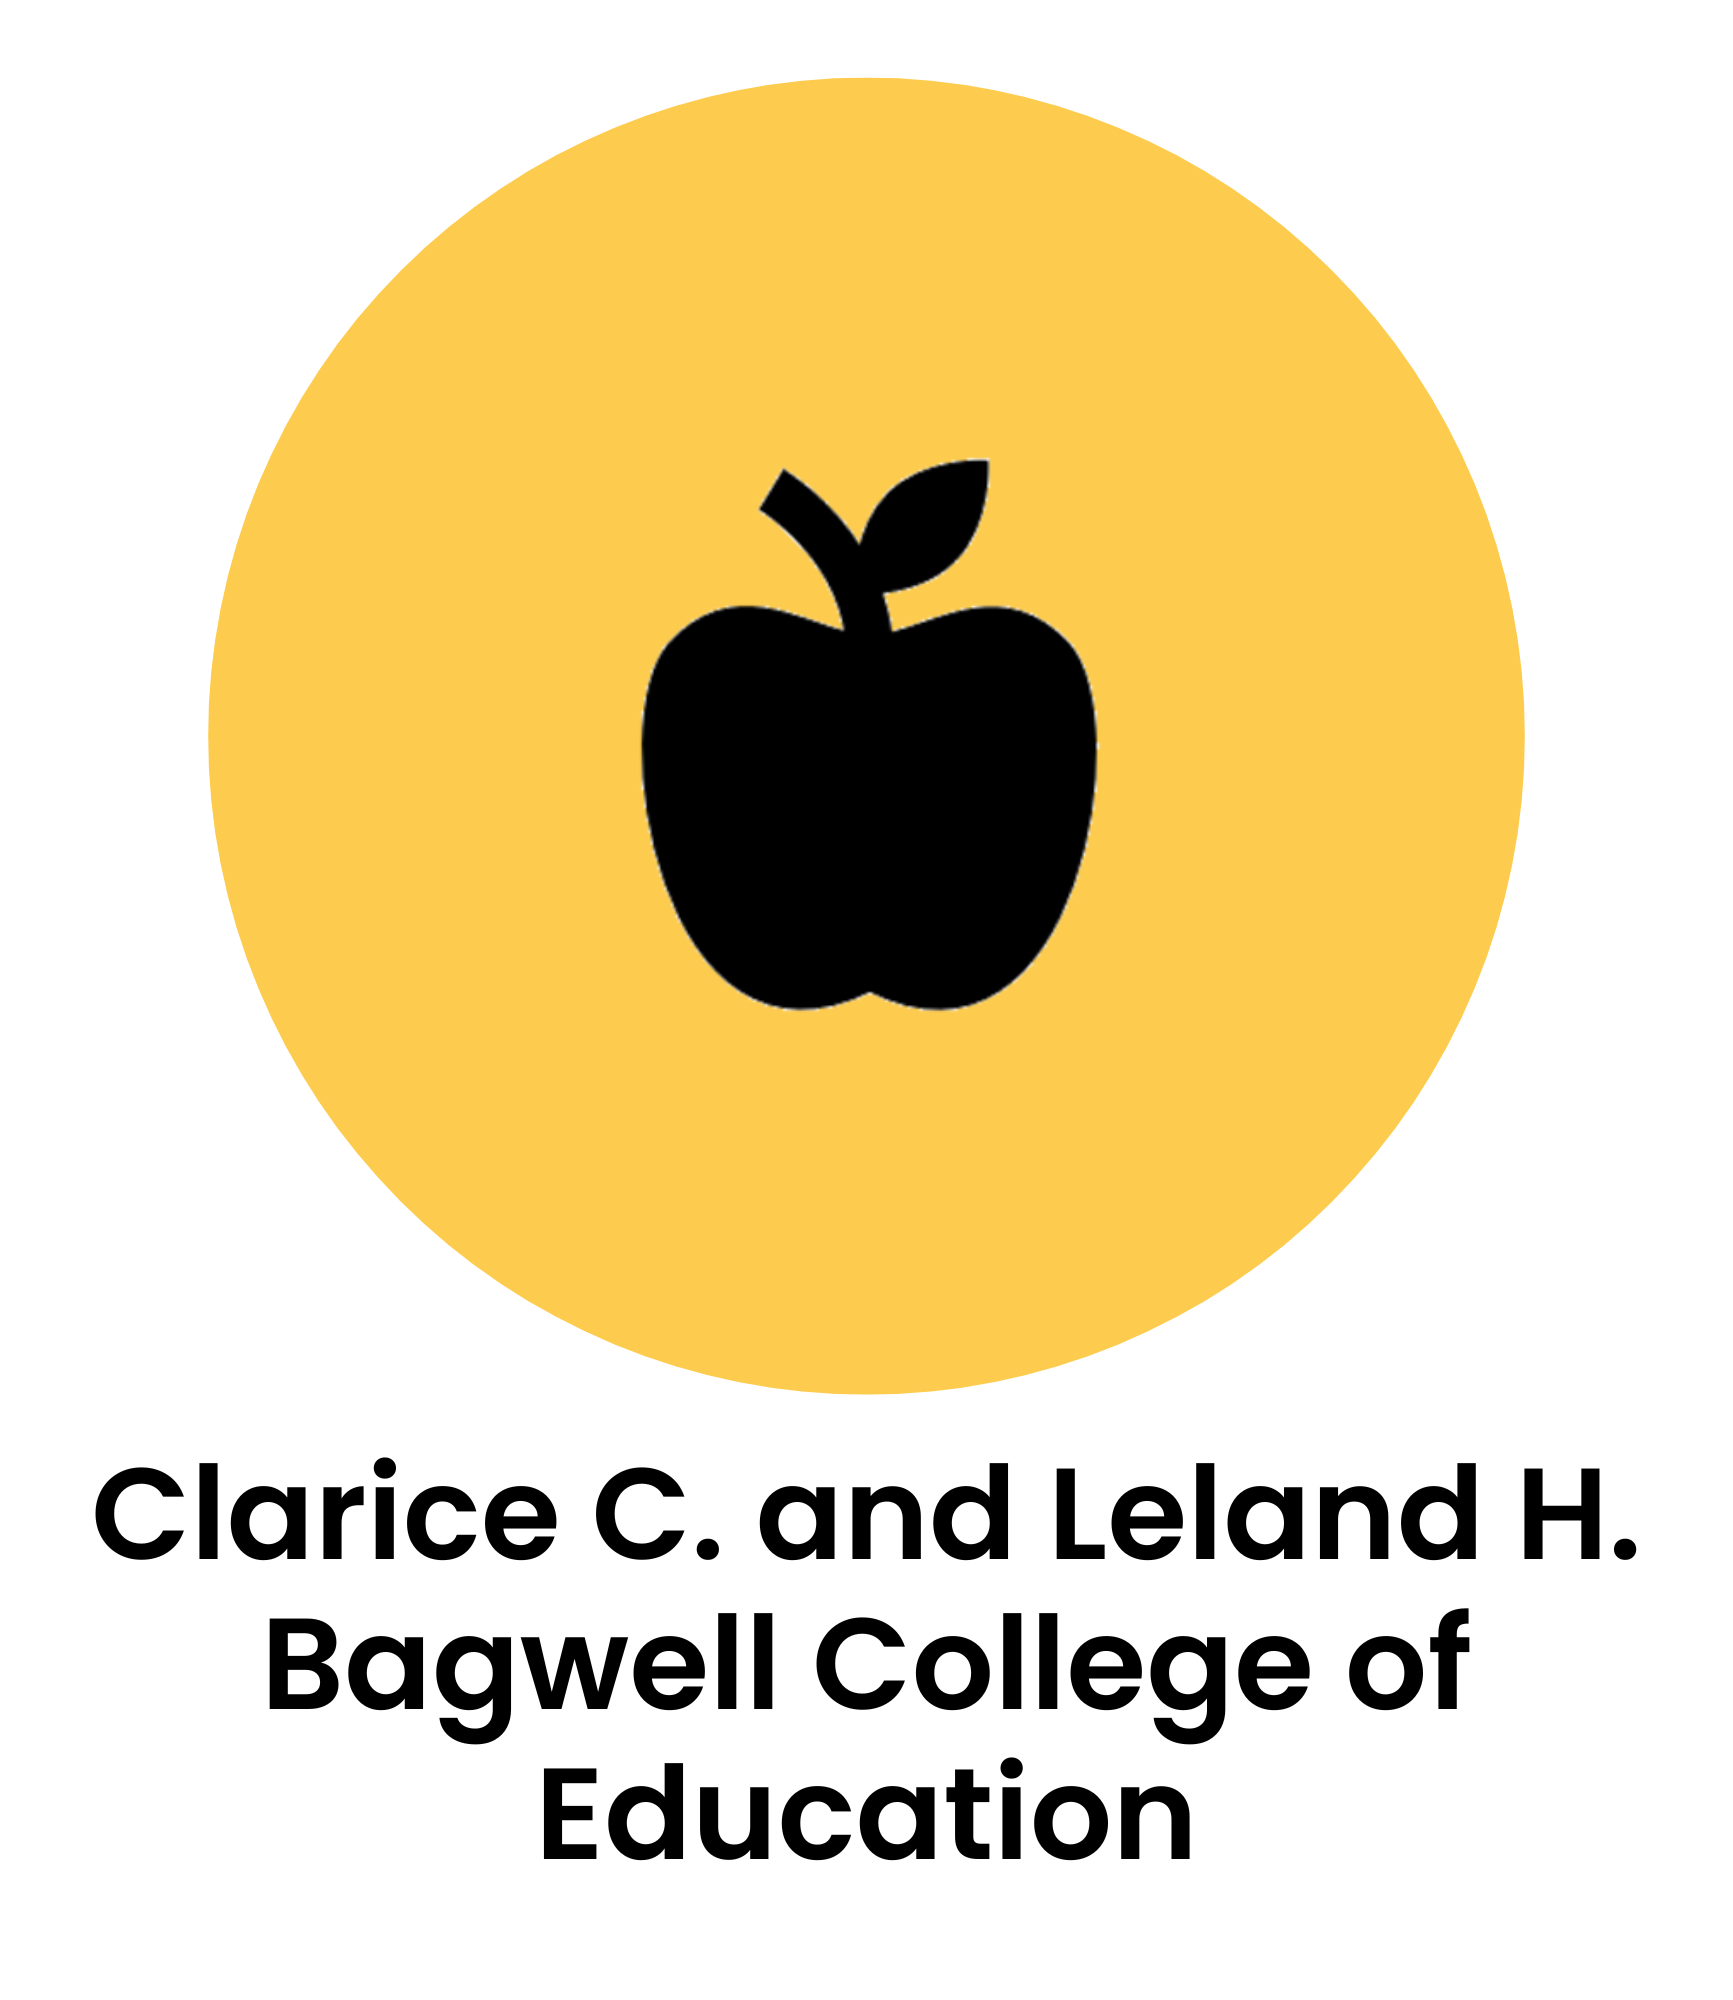 [text] Bagwell College of Education